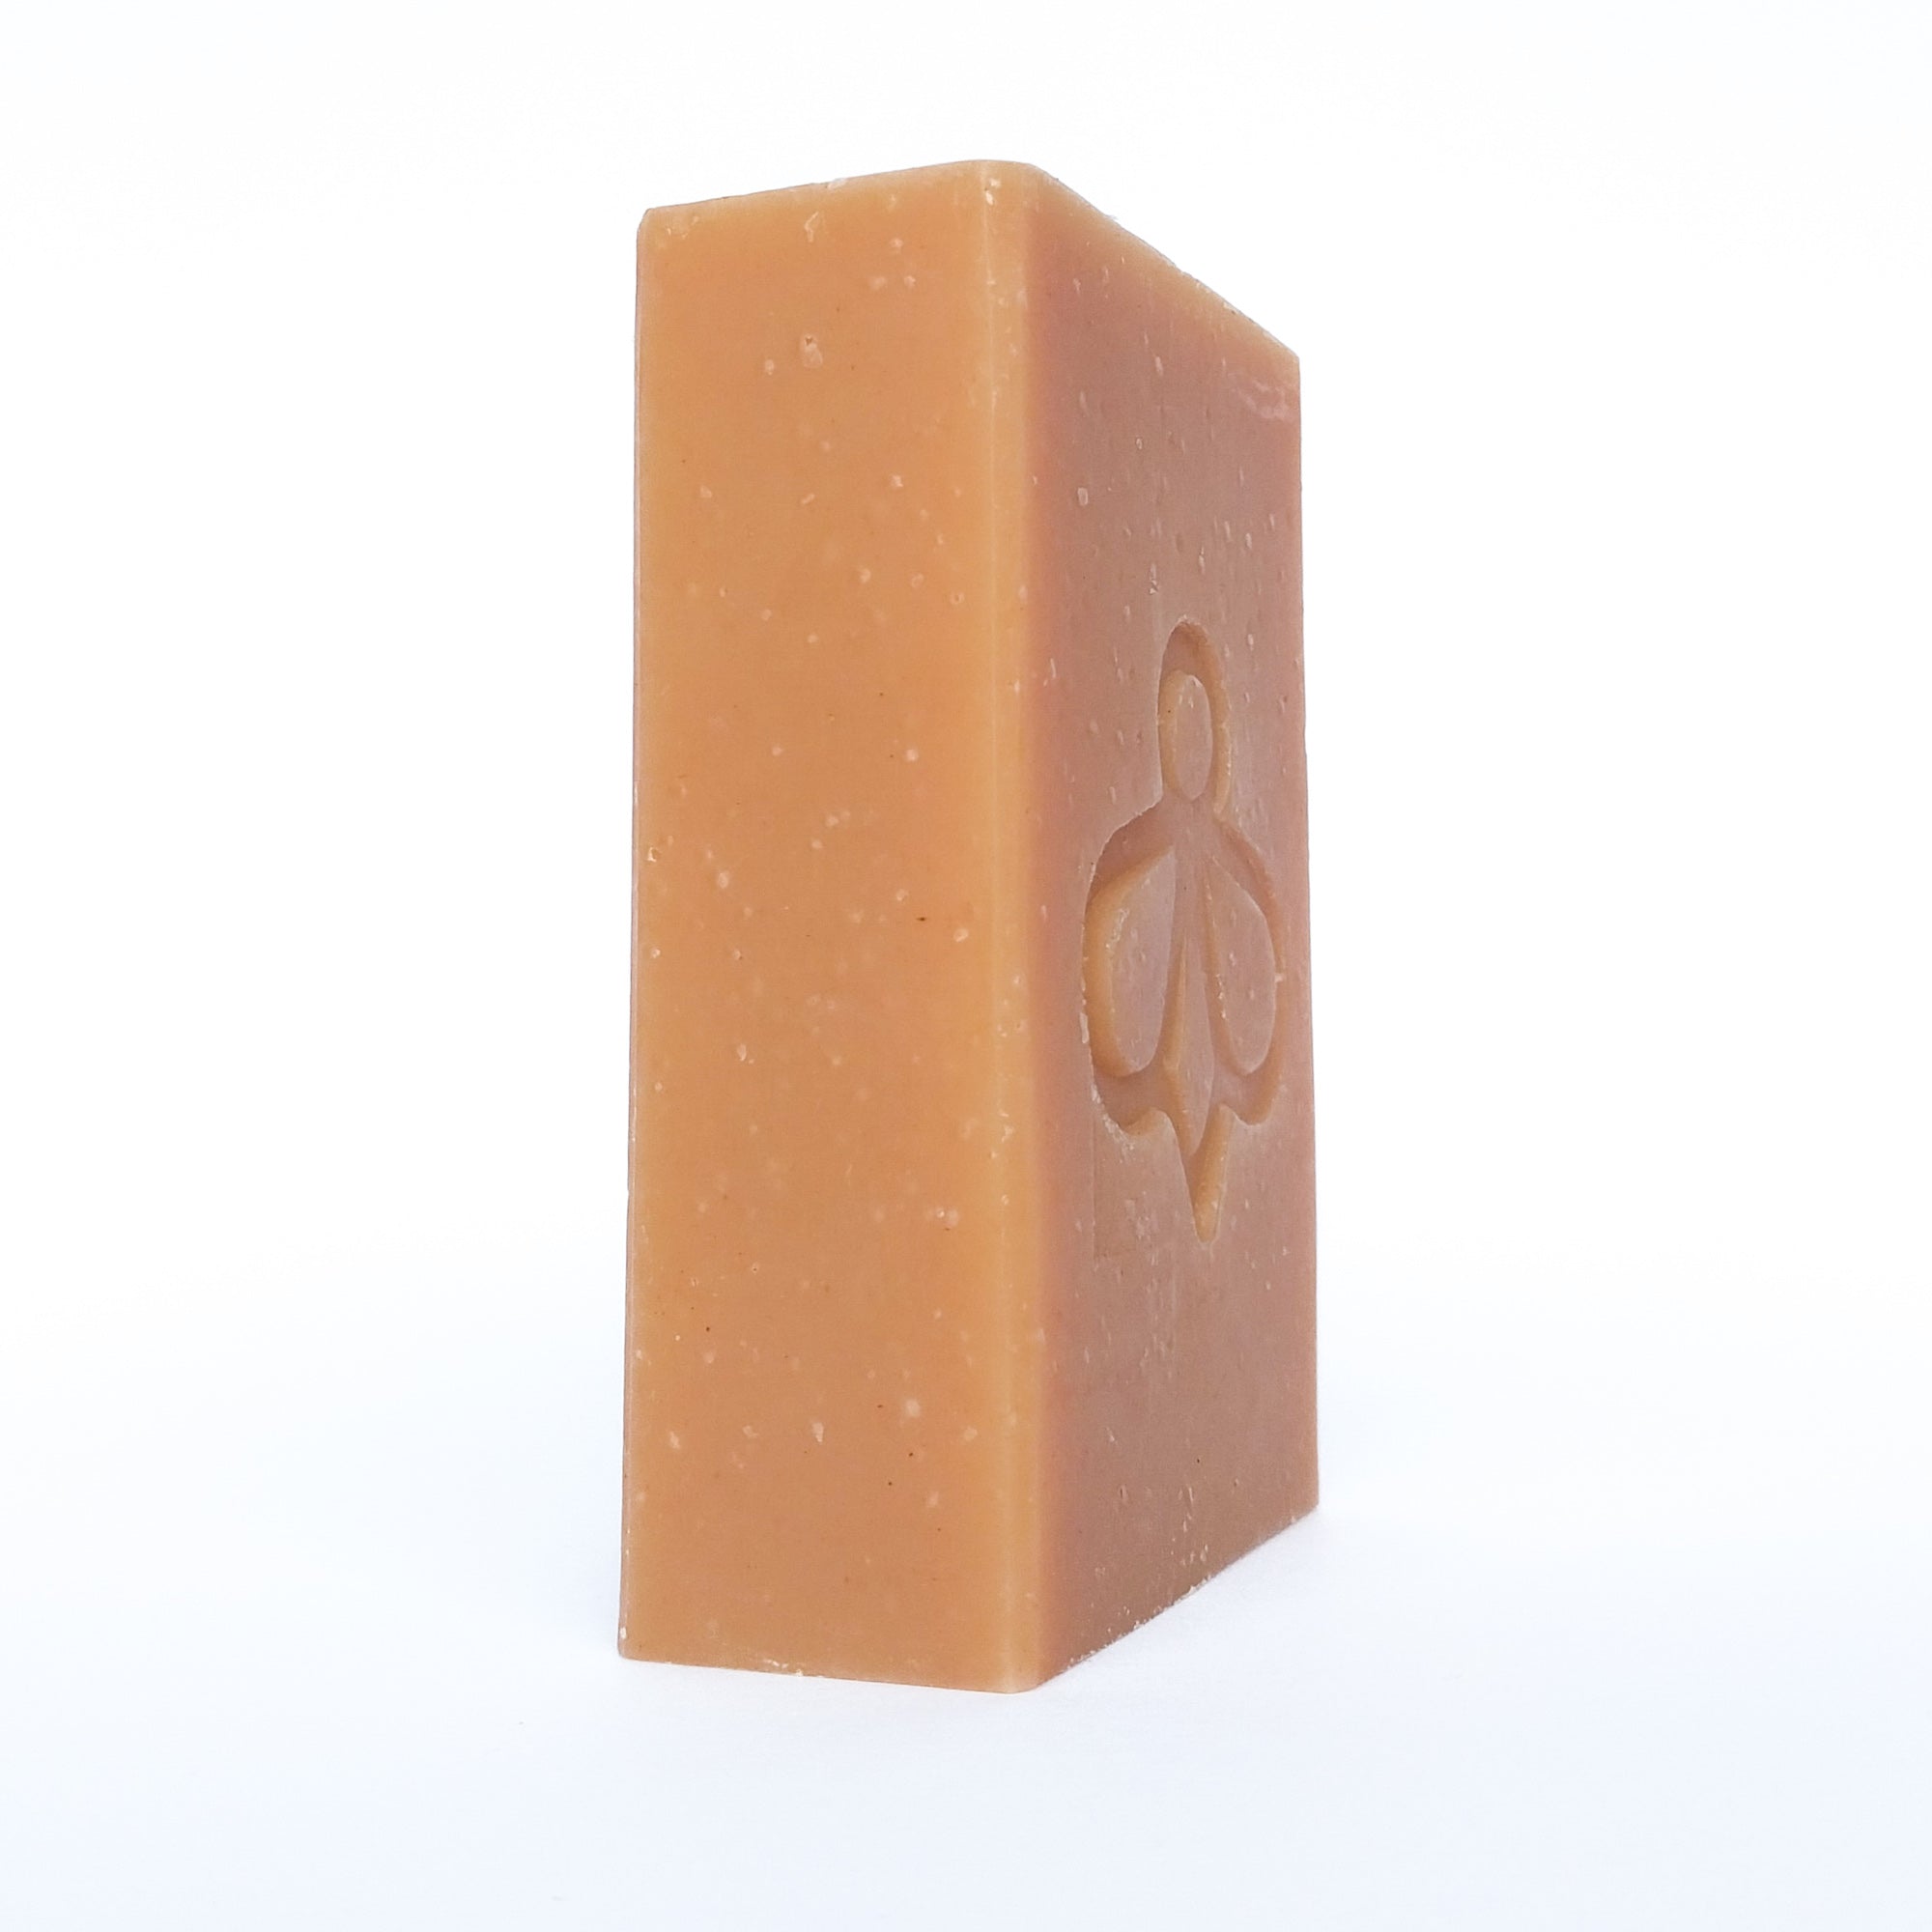 Honey Rose Soap on Angle - Featuring our bee logo imprint on a rose-coloured bar, displayed at an angle against a clean white background.